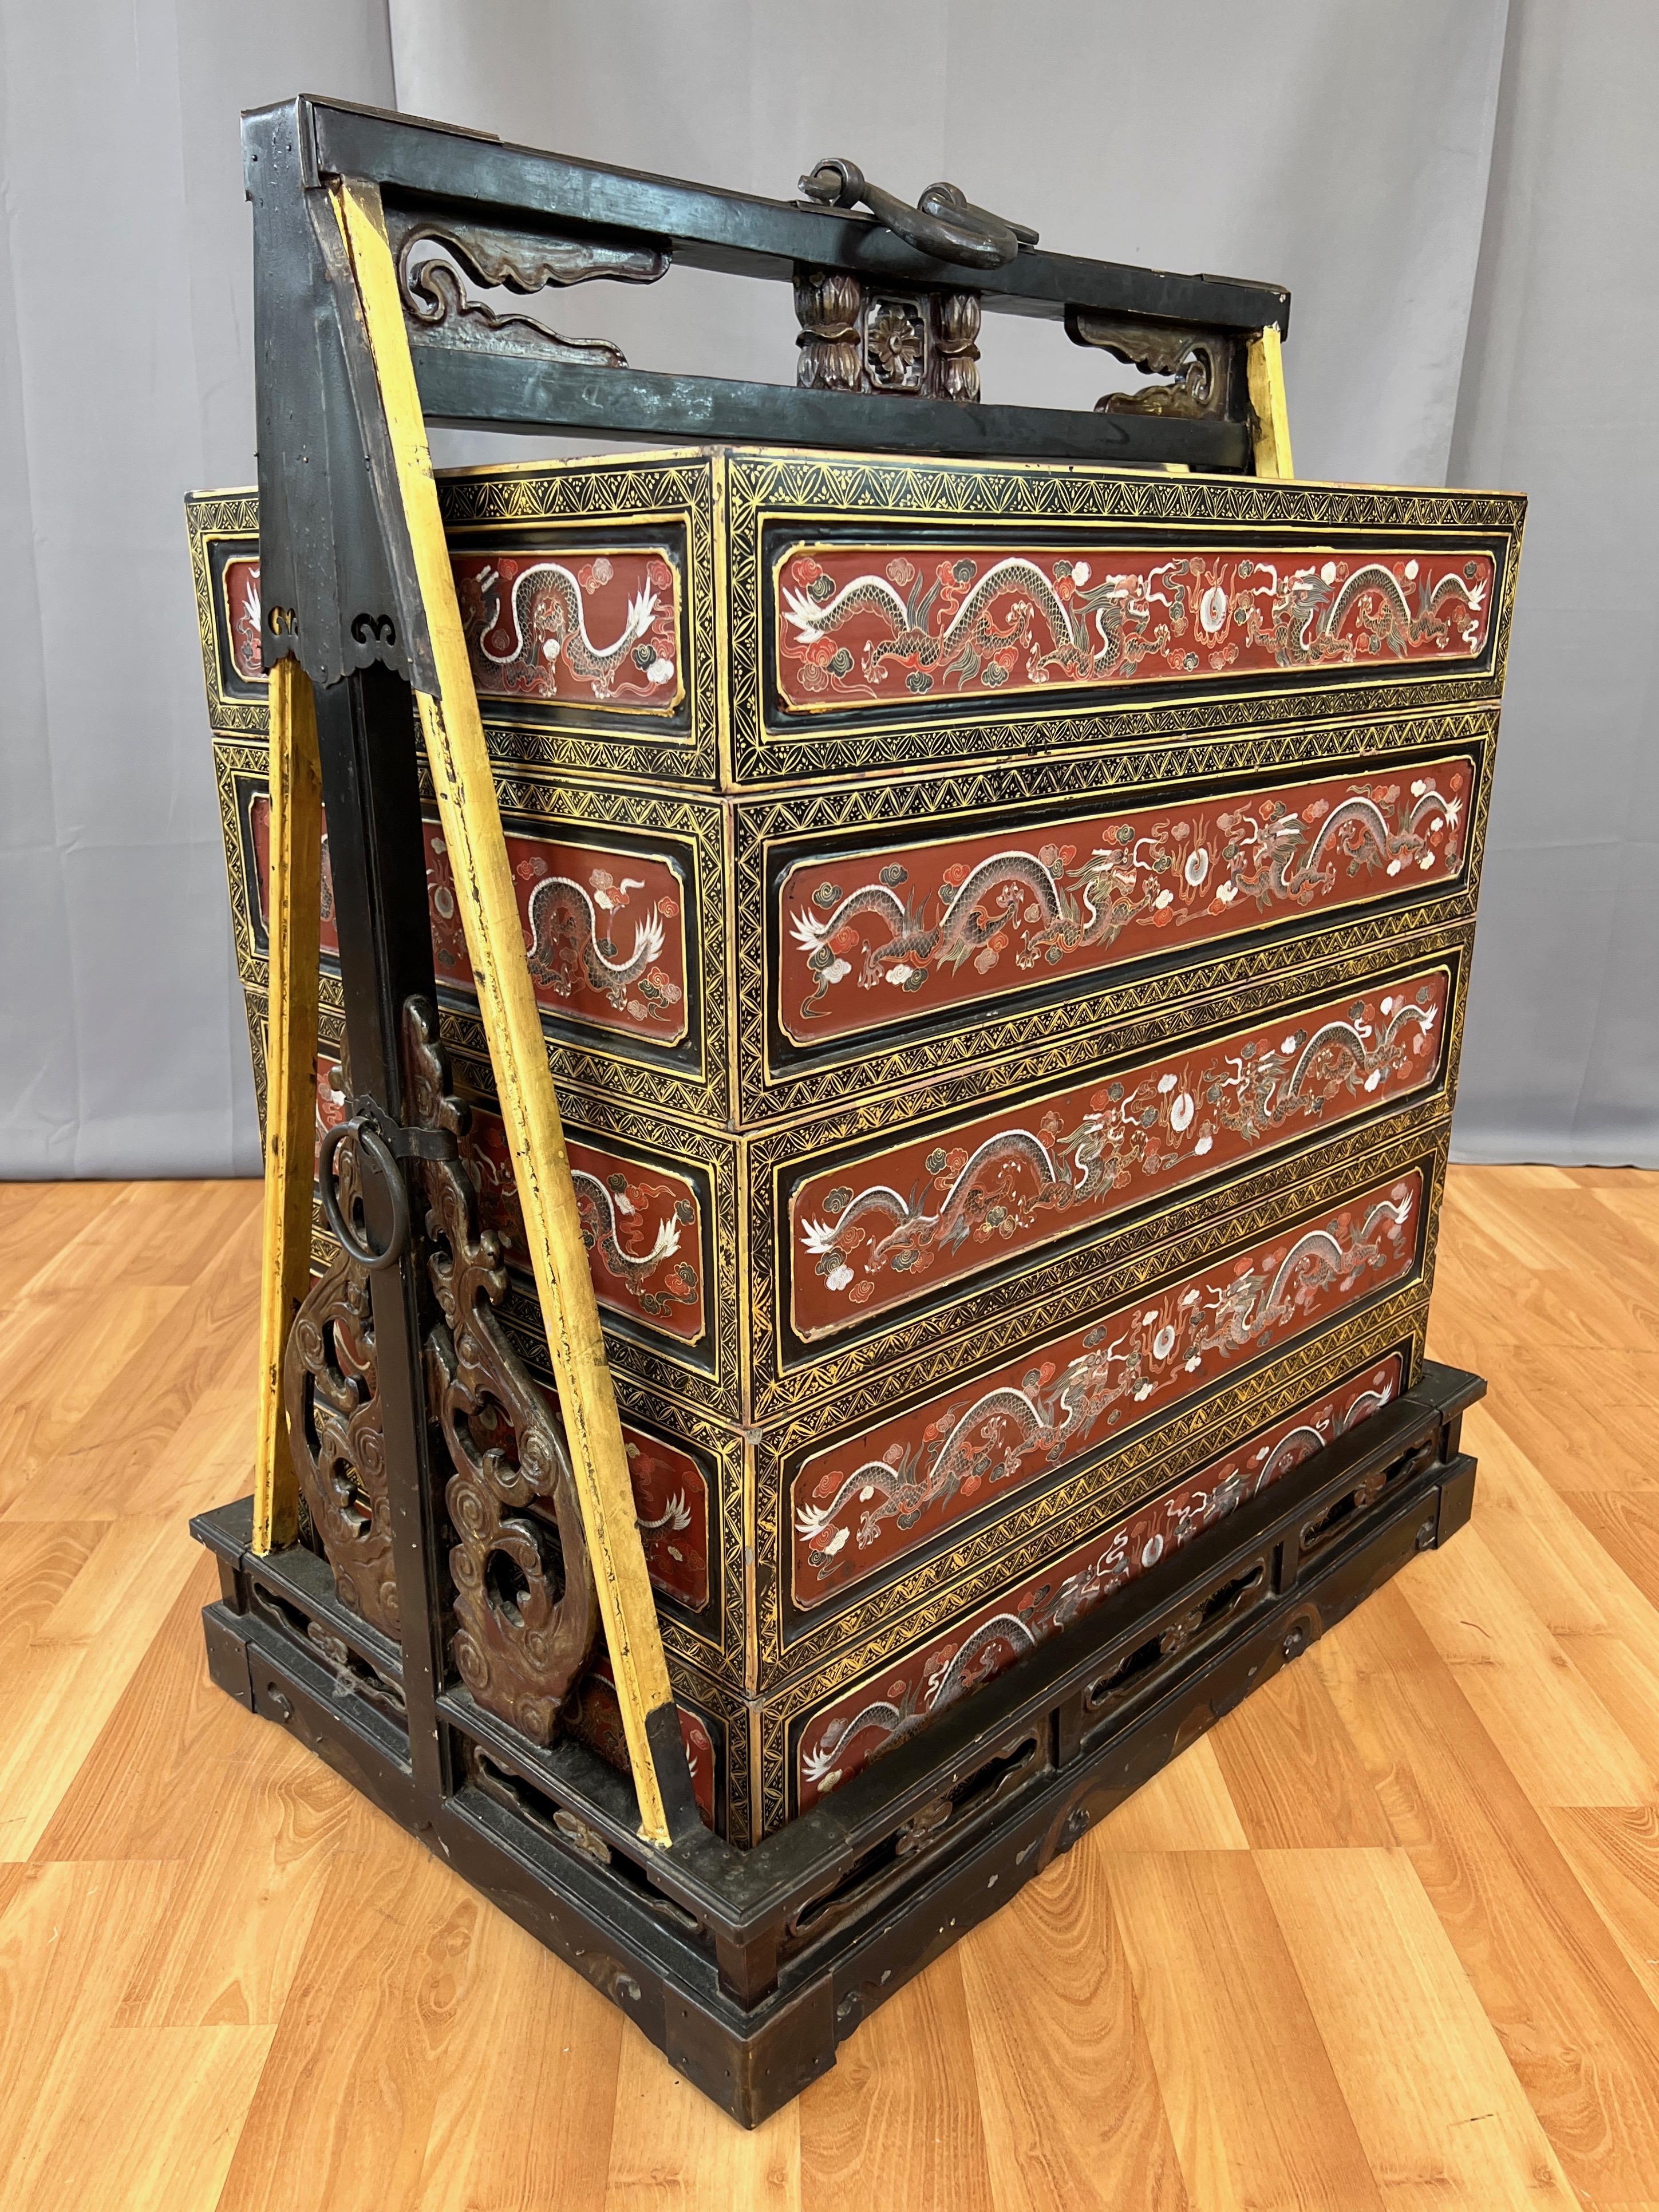 A large and impressive early 20th century Chinese Qing dynasty era hand-decorated lacquered and giltwood five-tier wedding dowry travel cabinet with carved wood and cast iron elements.

Comprised of five removable lacquered boxes with oxblood